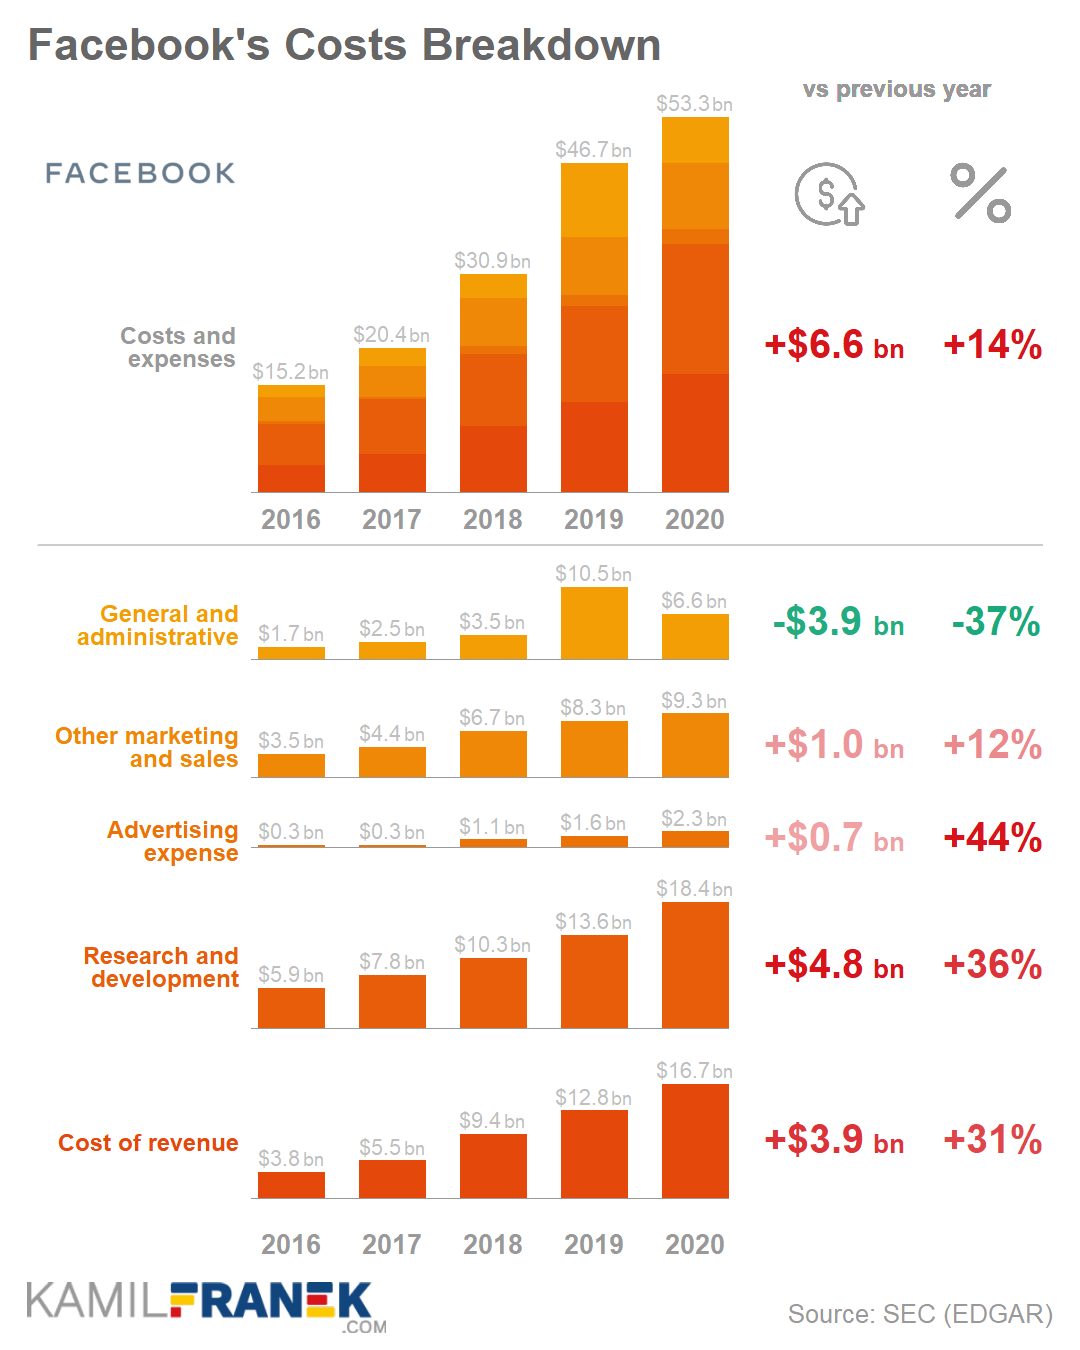 Facebook's costs and expenses breakdown chart 2020